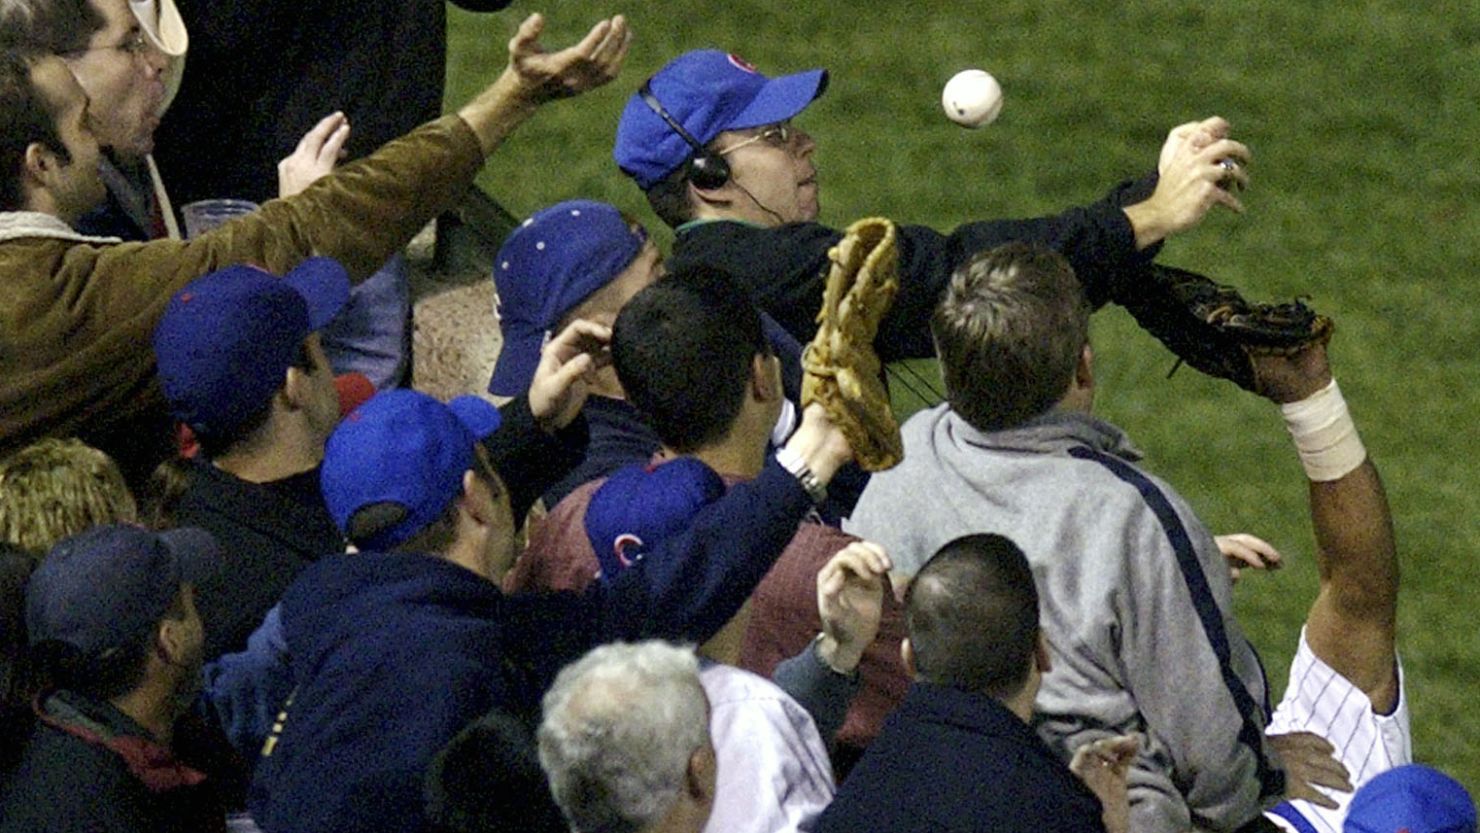 On October 14, 2003, Cubs left fielder Moises Alou's arm reaches into the stands unsuccessfully for a foul ball tipped by fan Steve Bartman, wearing headphones and glasses.